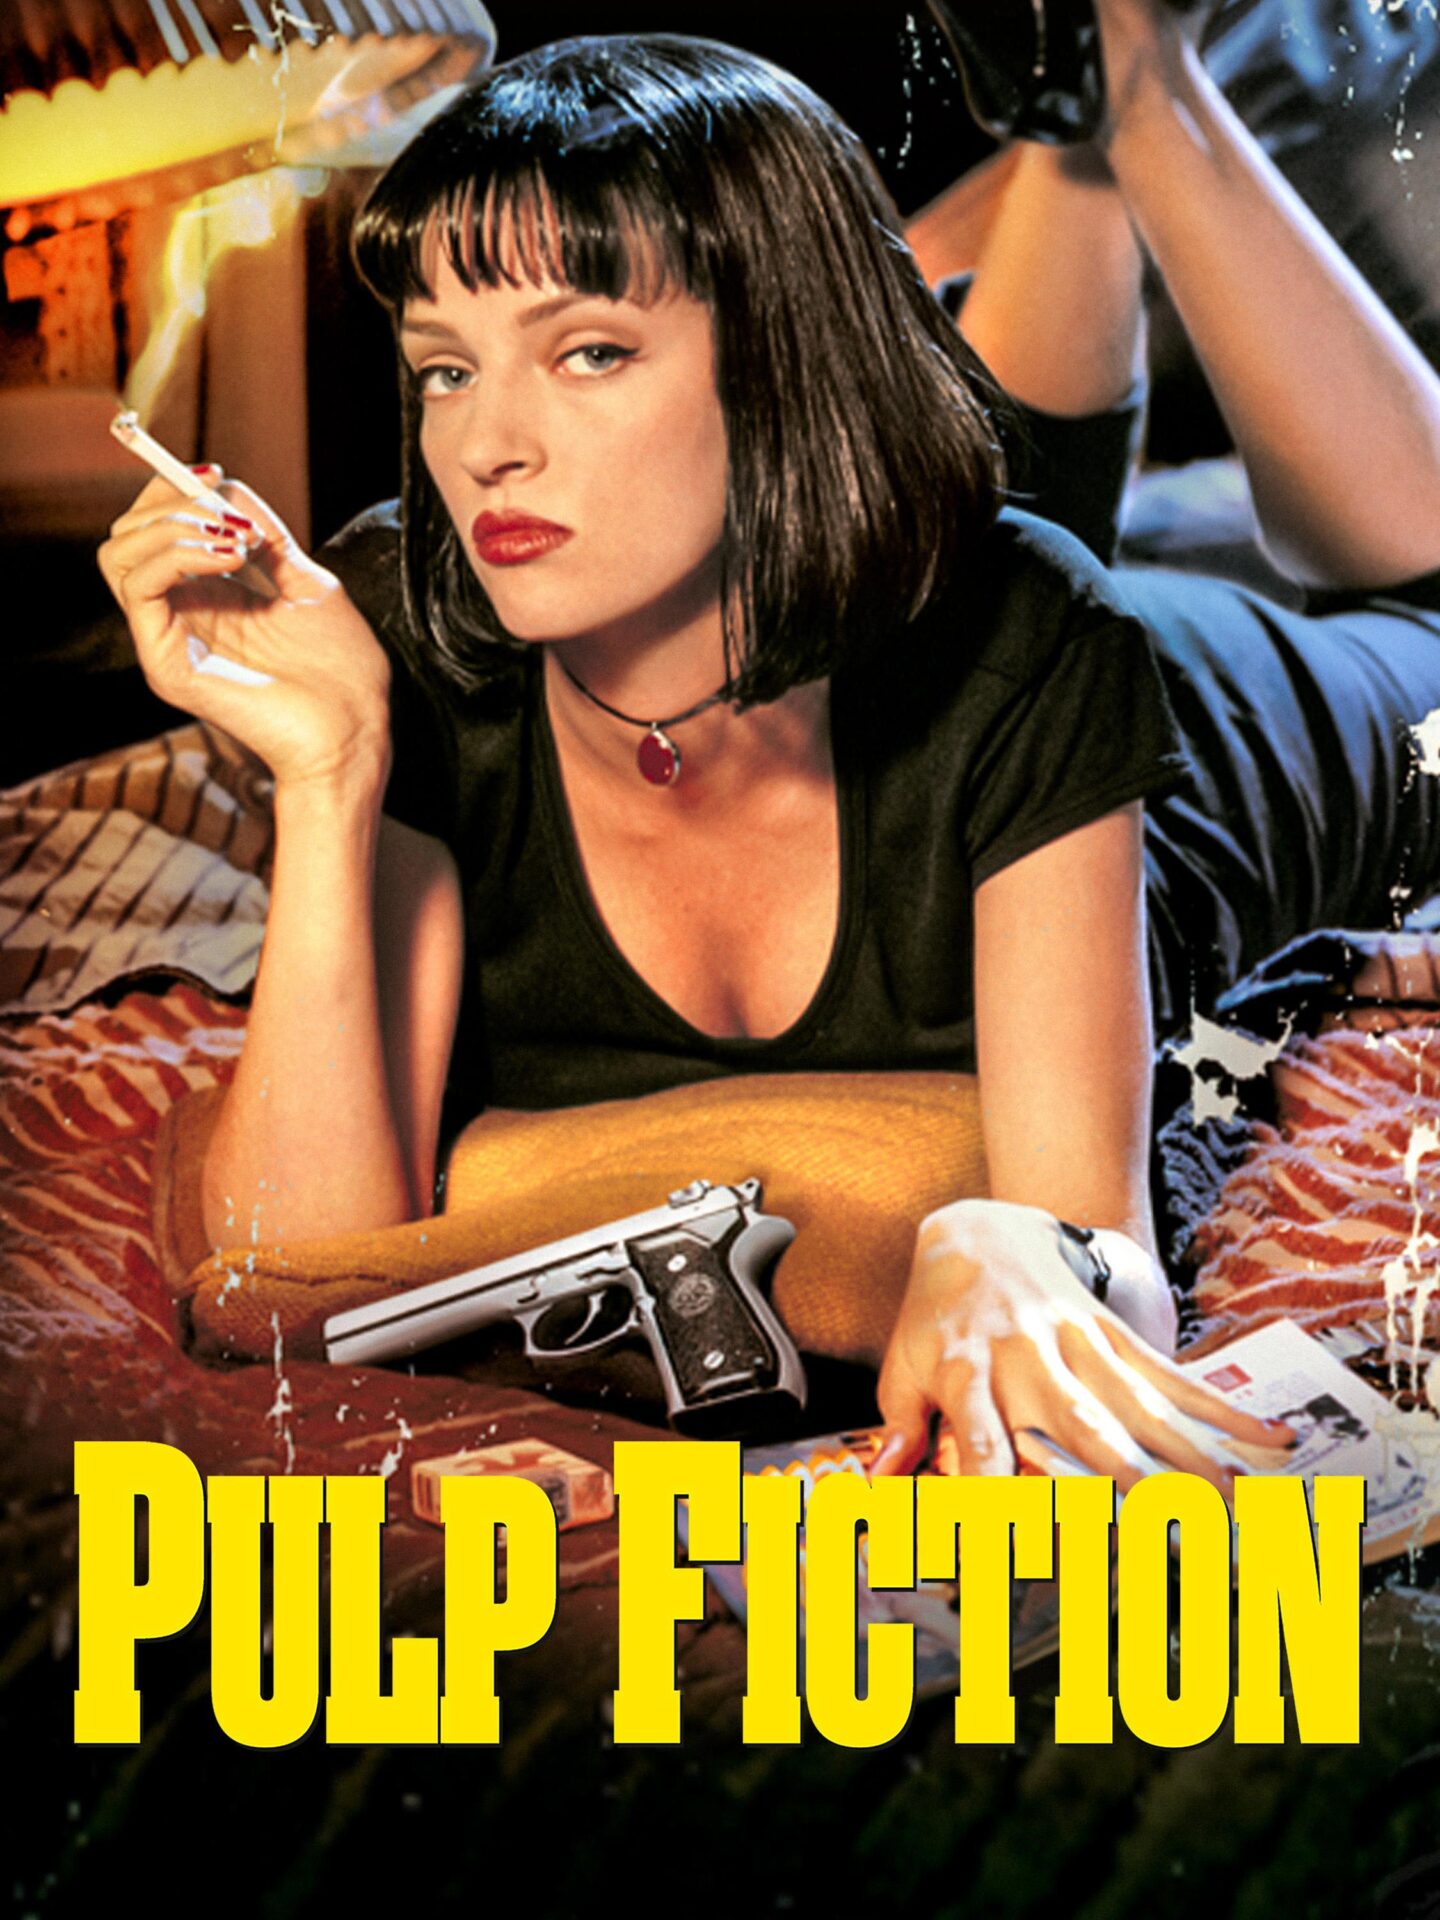 The Cultural Impact of Pulp Fiction: Influences on Music, Art, and Popular Culture